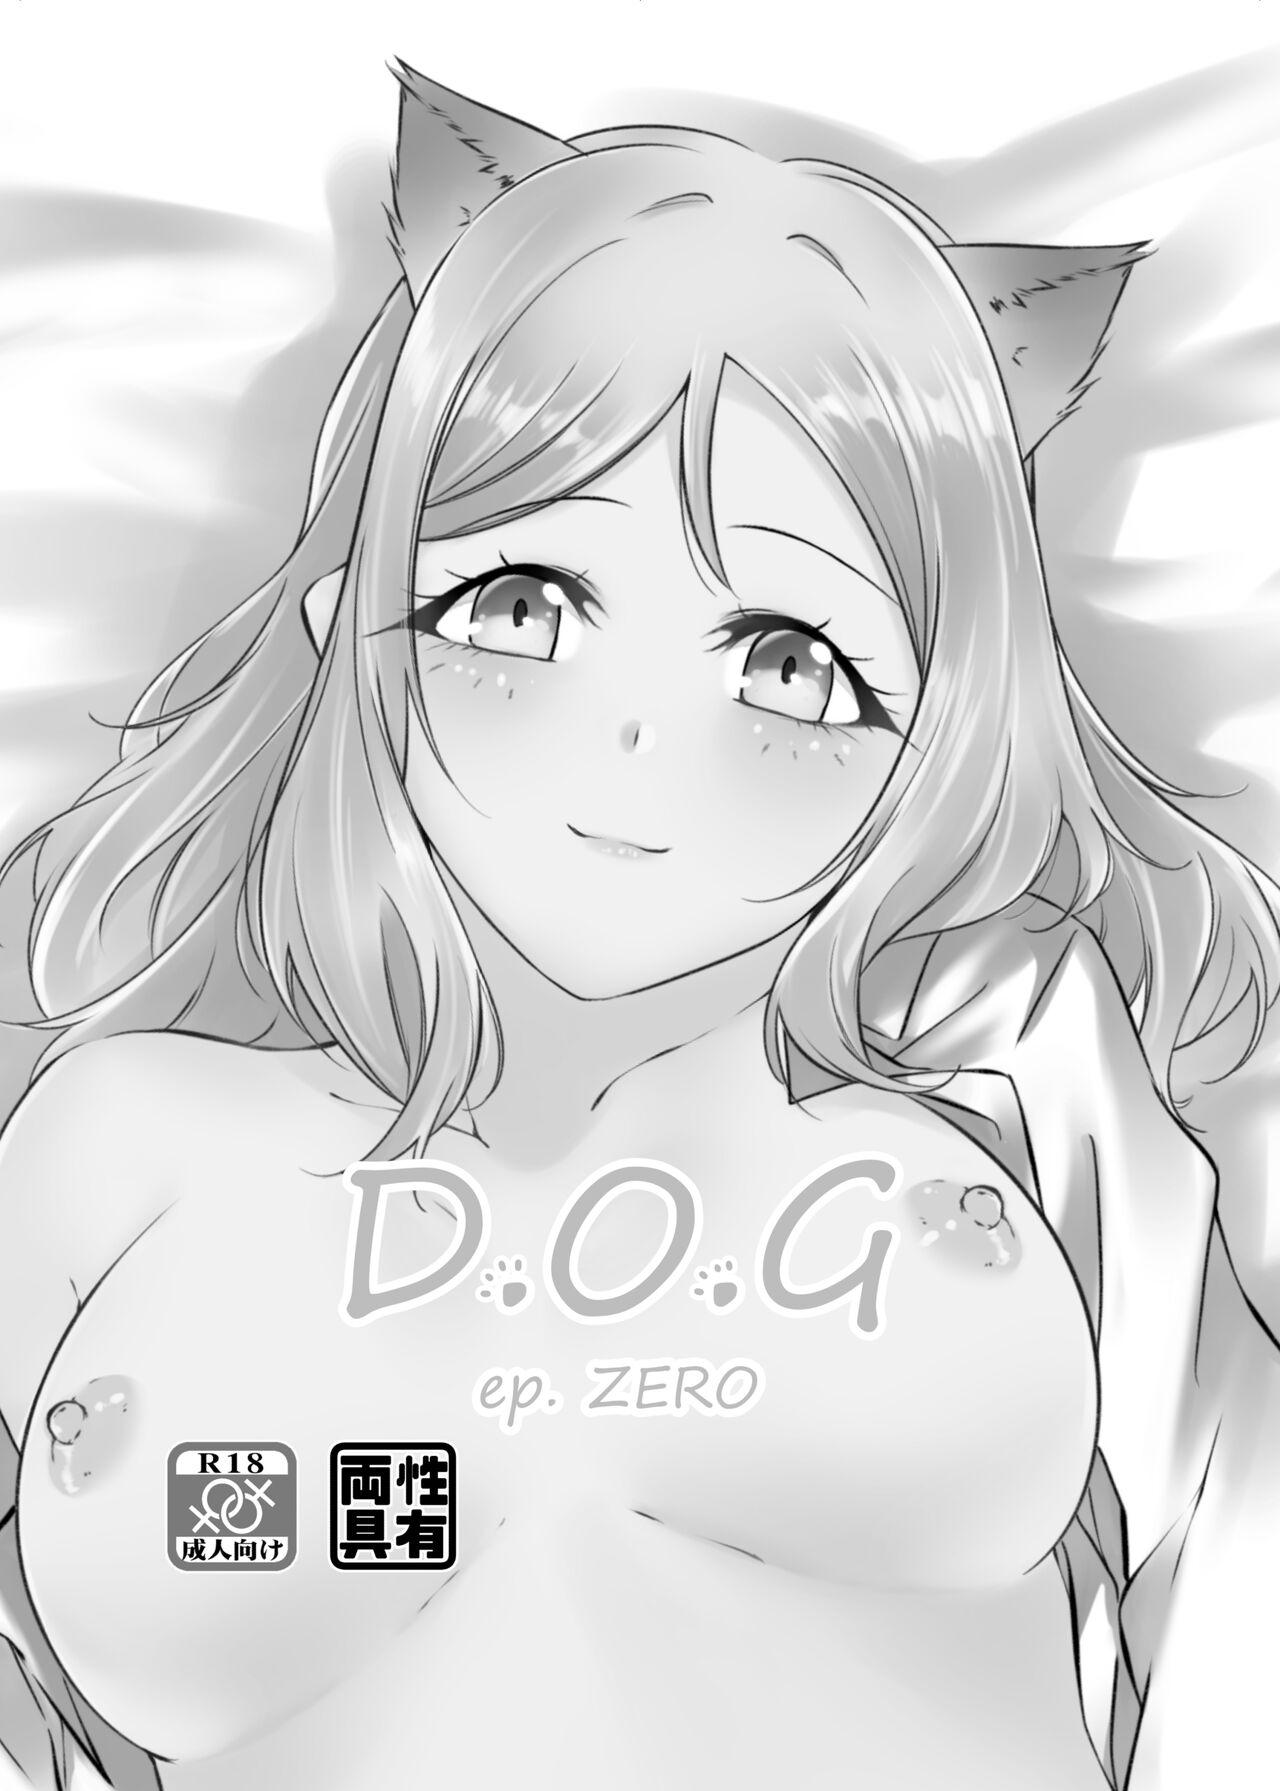 Bokep D.O.G ep. ZERO + D.O.G side.KANAN - Love live sunshine Gay Party - Page 1